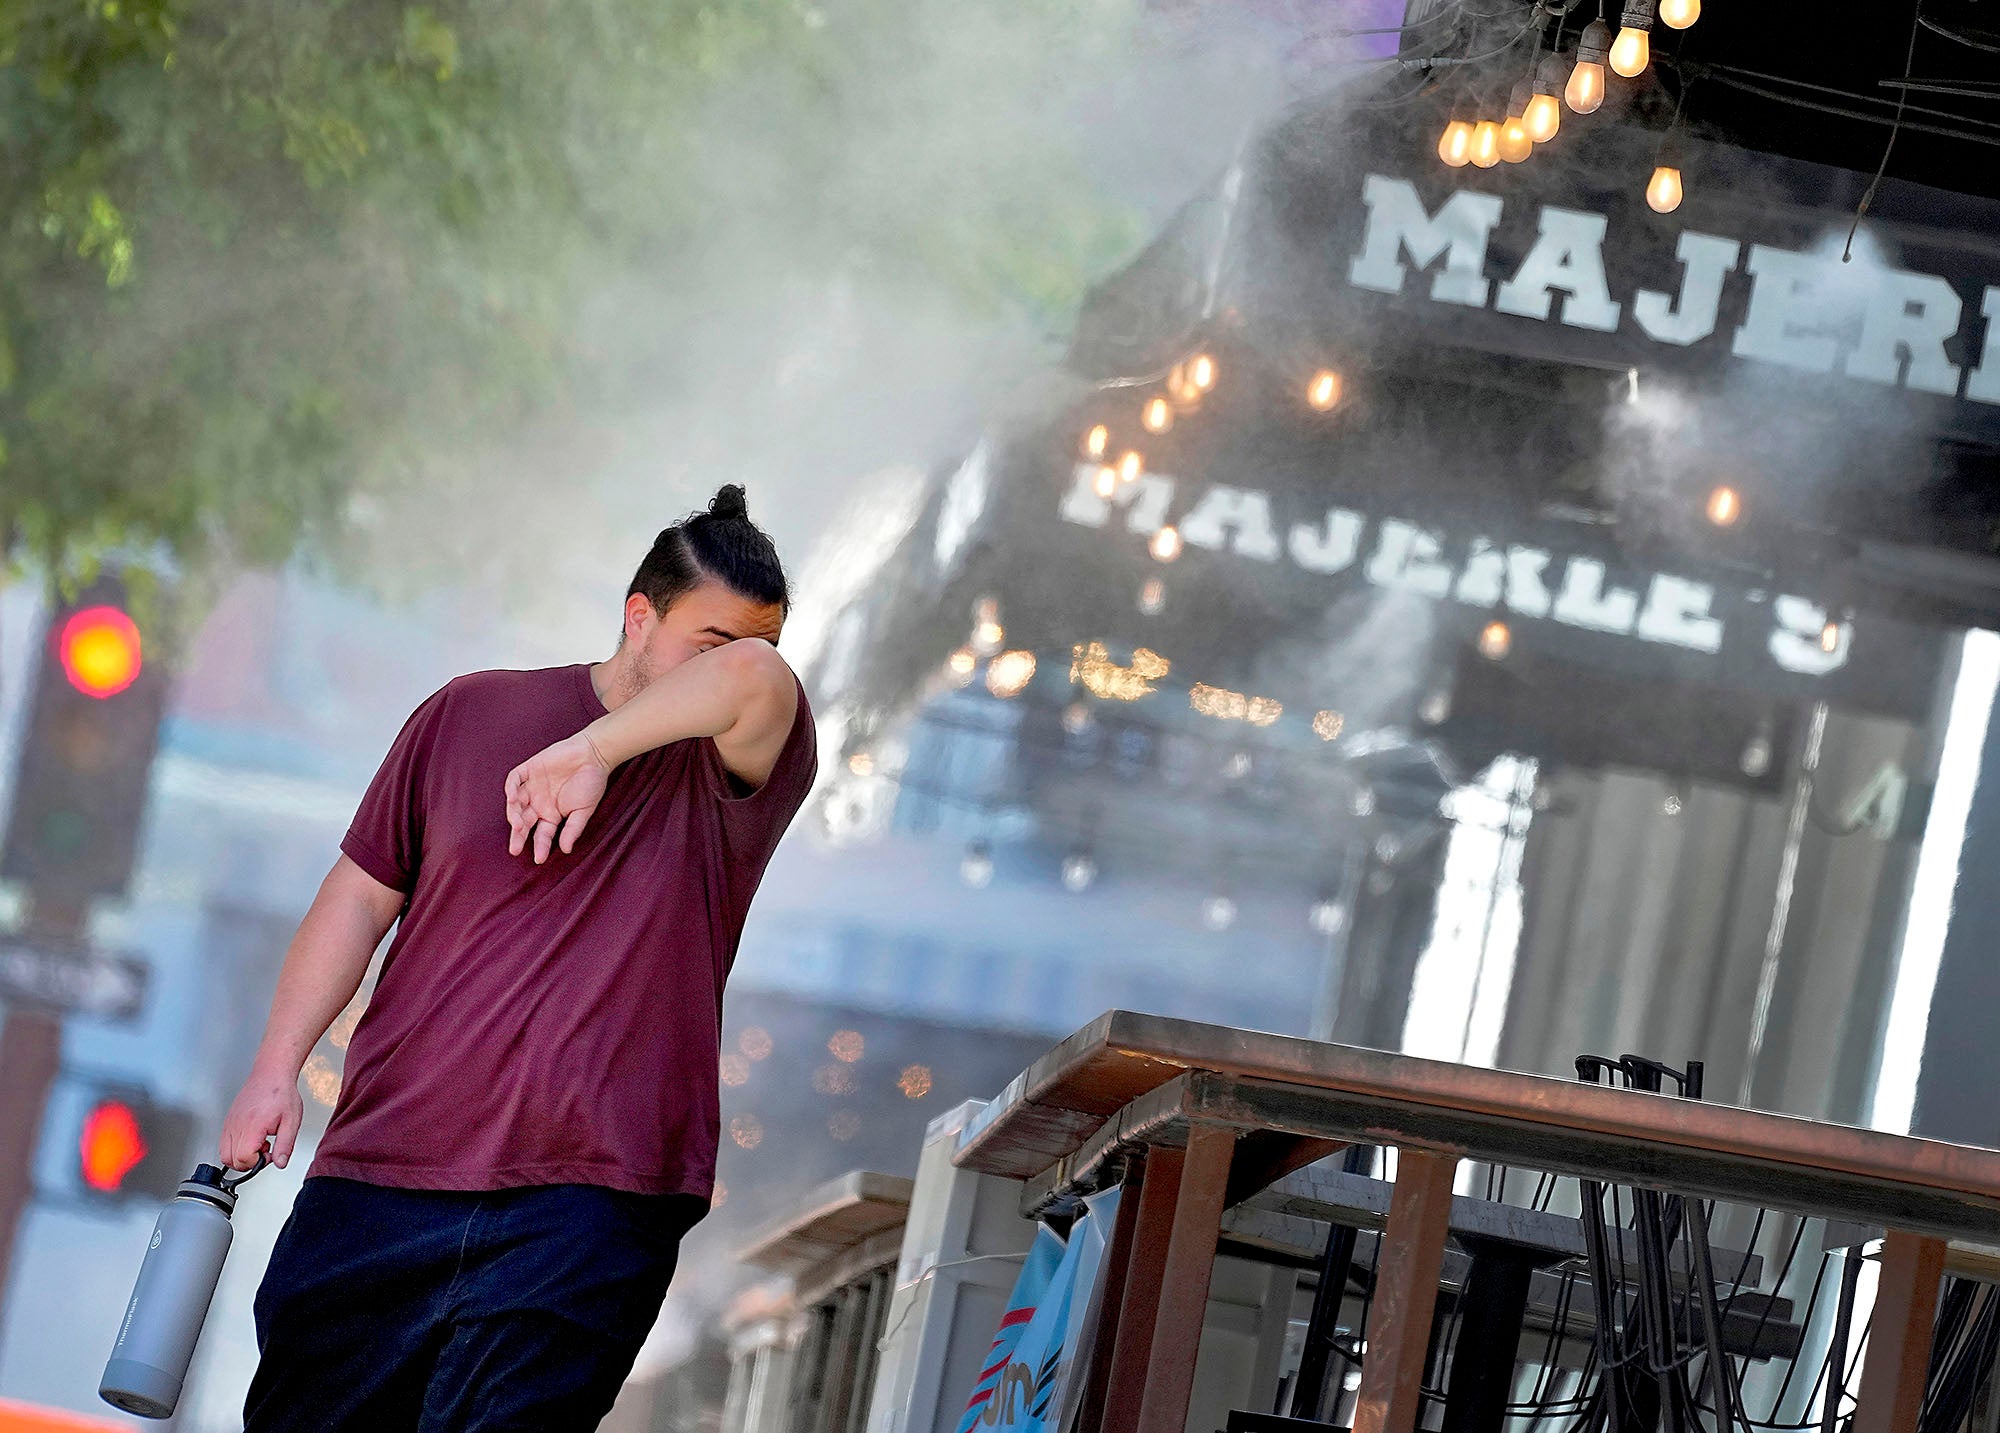 A man wipes his brow as he walks under misters on July 13, 2023 in downtown Phoenix.